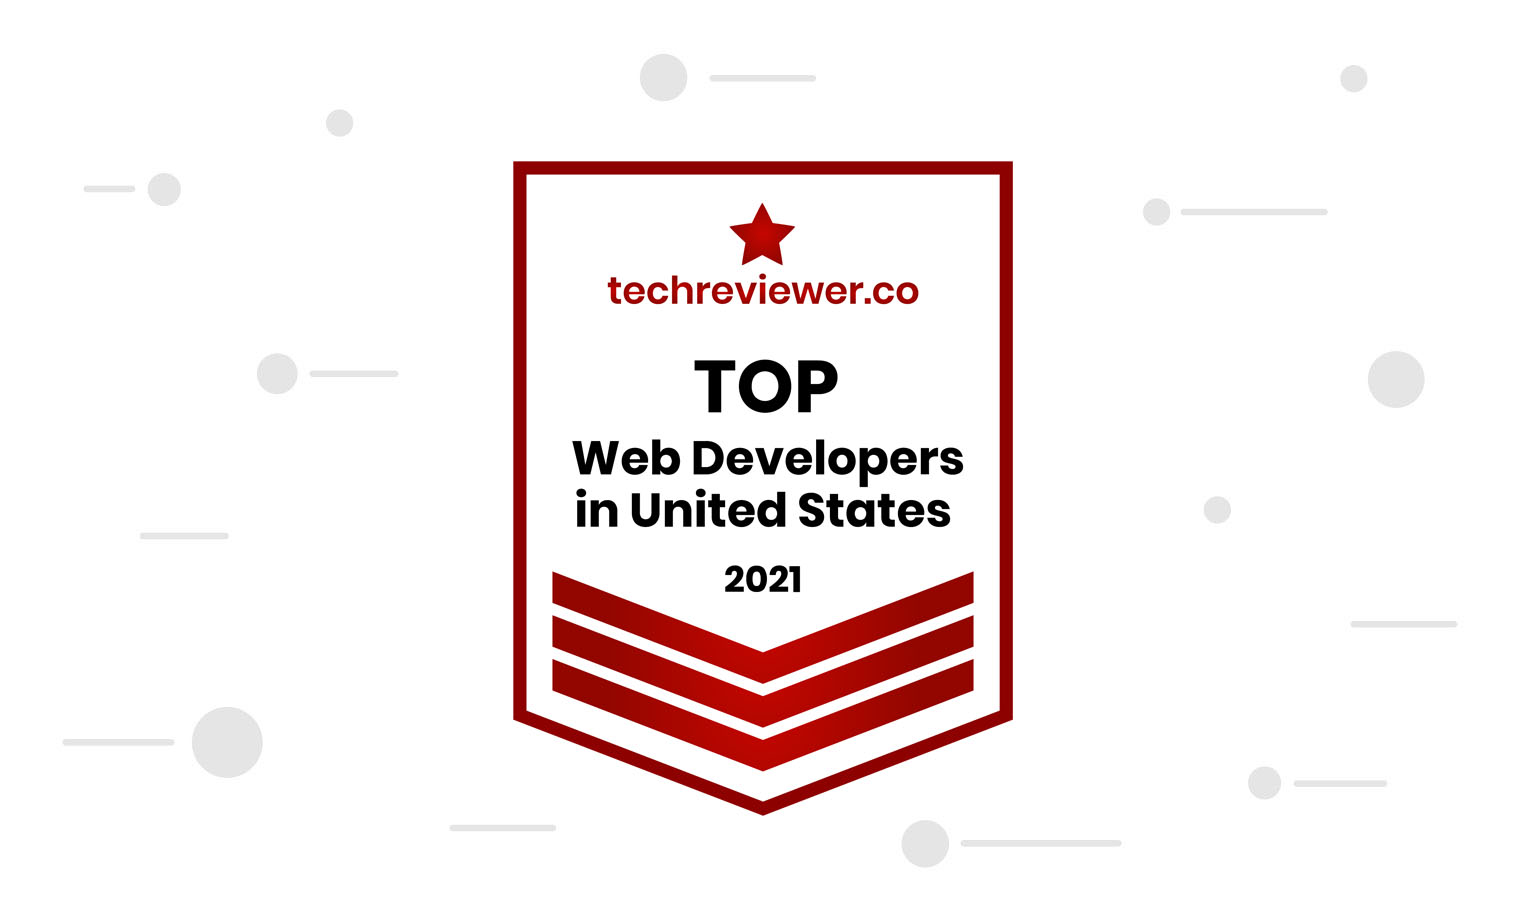 Blue Flame Thinking wins Tech Reviewer 2021 Top Web & App Development Companies in the U.S.